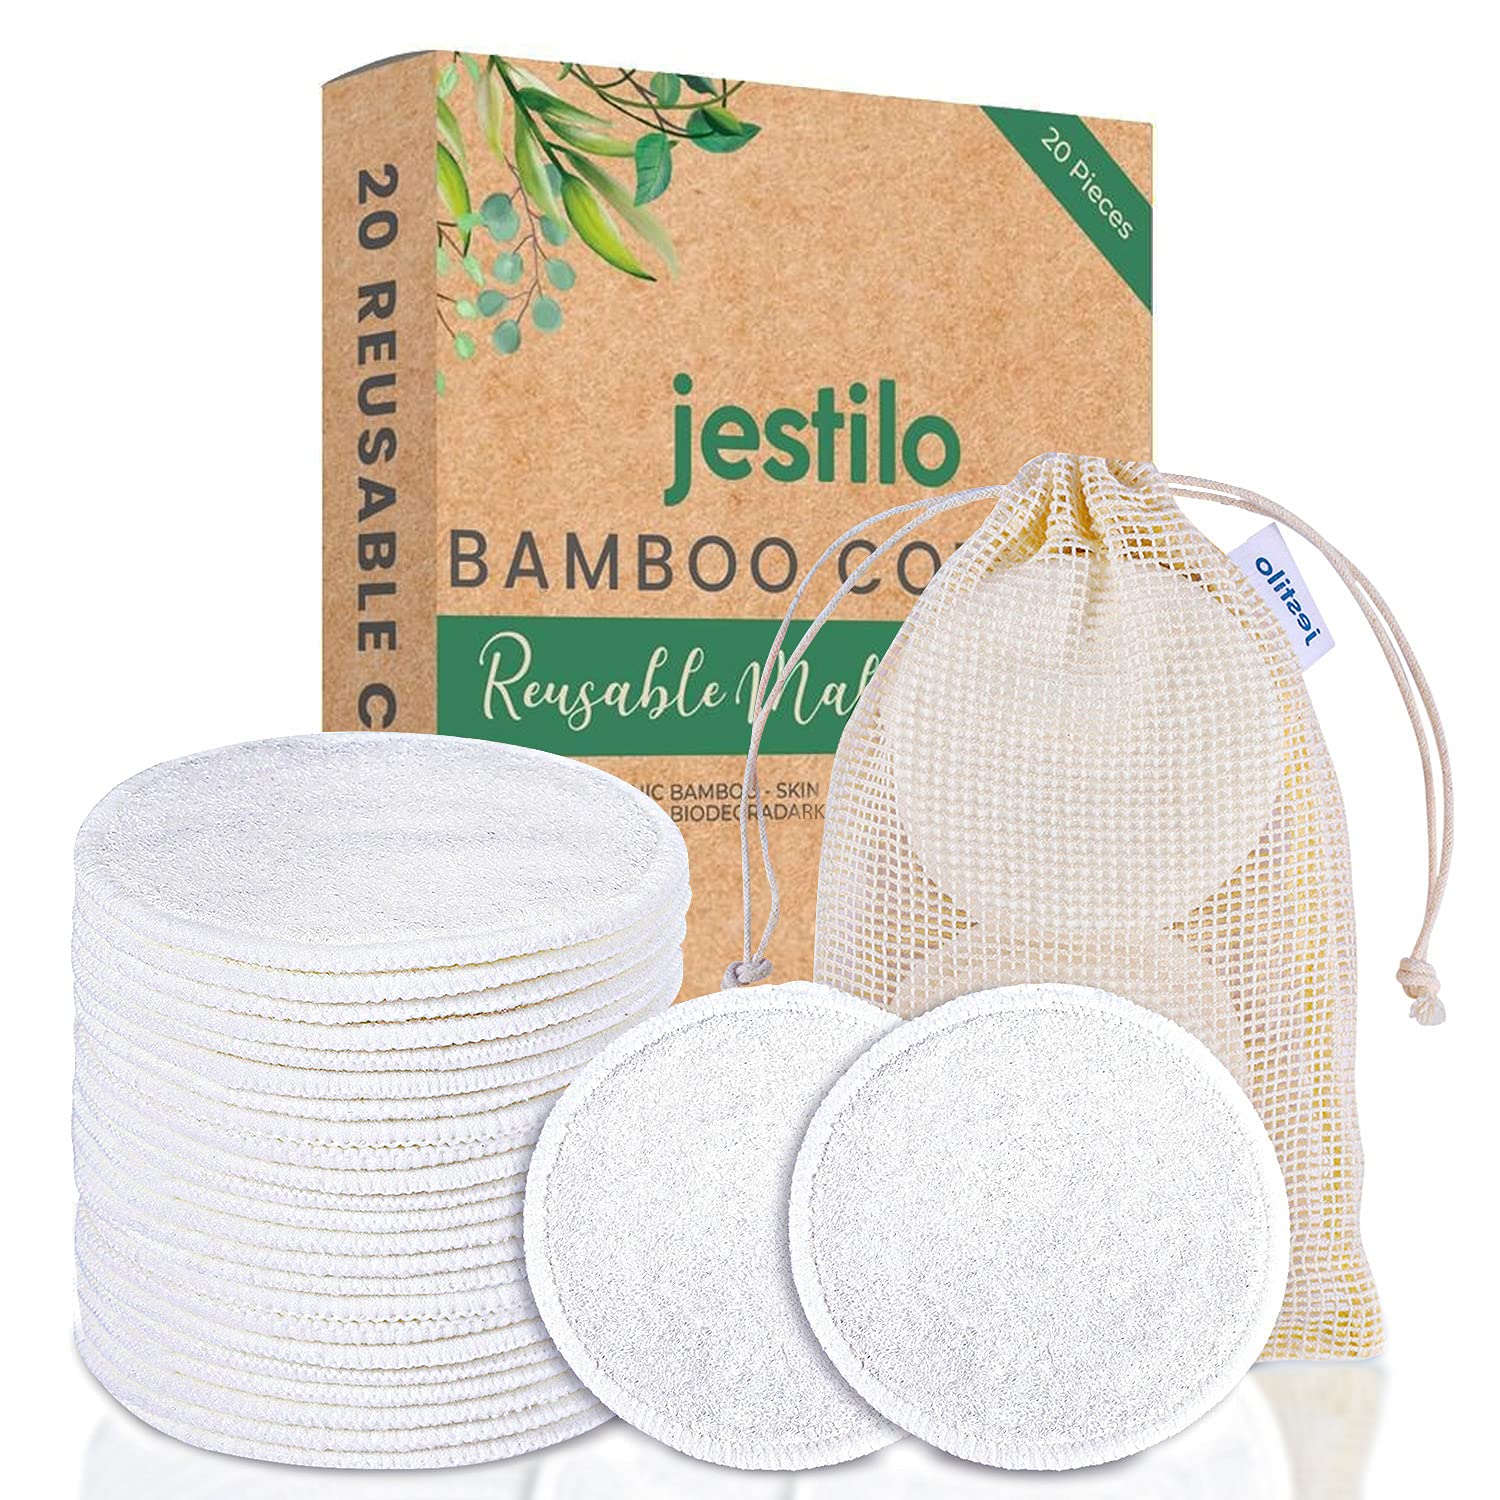 Jestilo Reusable Cotton Pads with Laundry Bag, 20 Pcs Reusable Makeup Remover Pads, Soft Textured Eco Friendly Cotton Wool Pads, Bamboo Face Cleaning Pads for All Skin Types, Zero Waste Washable Pads